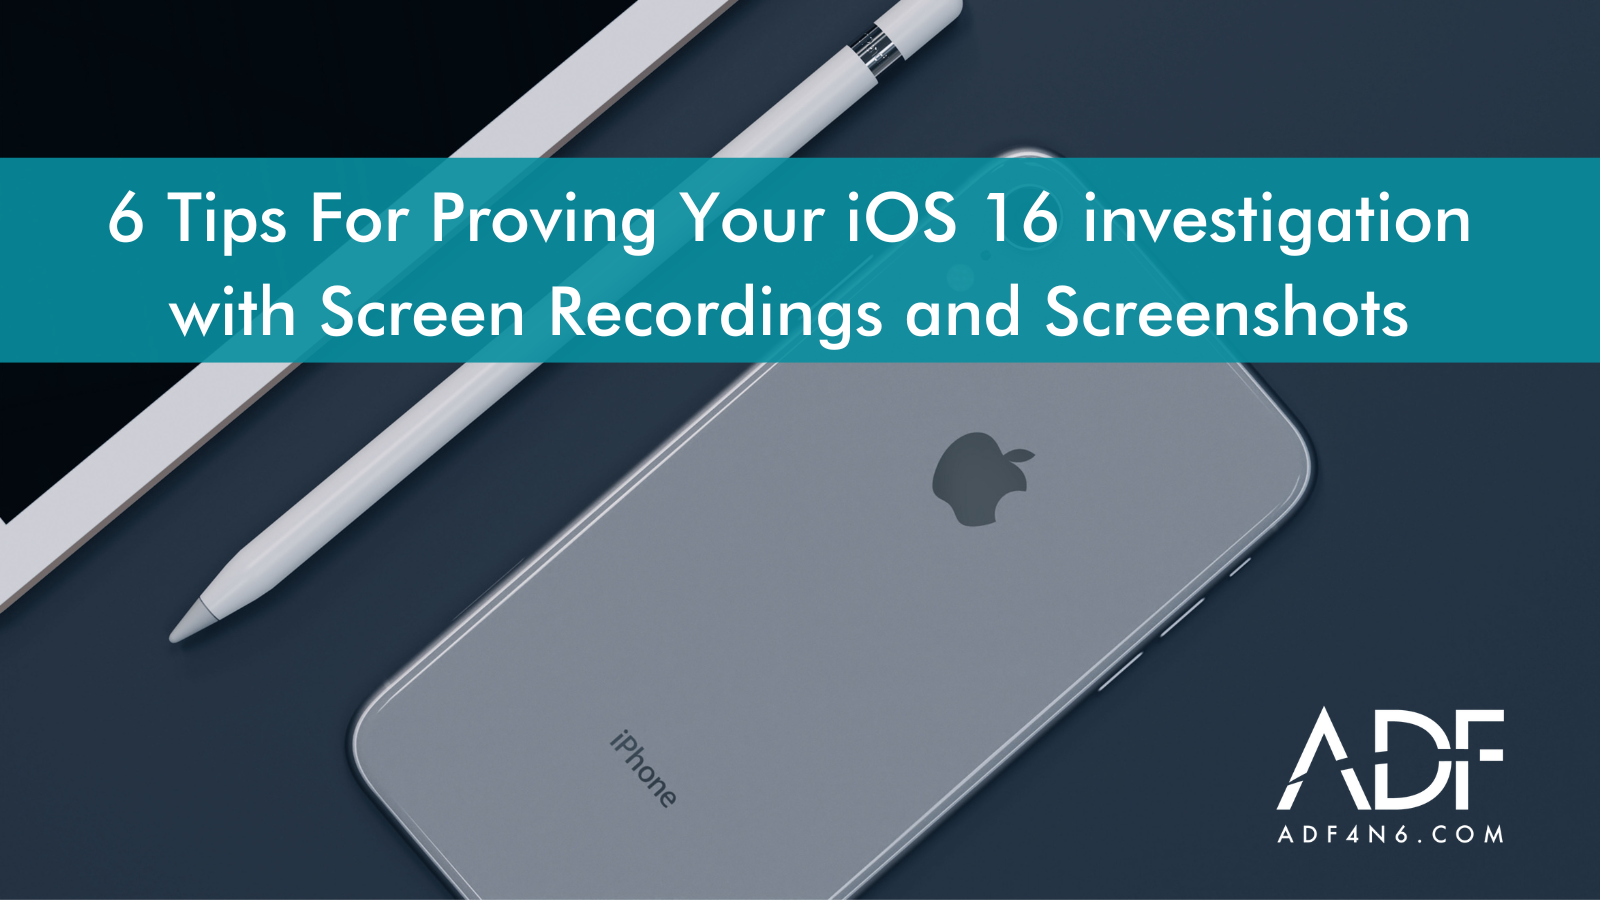 Proving iOS 16 Investigation: 6 Tips with Recordings and Screenshots